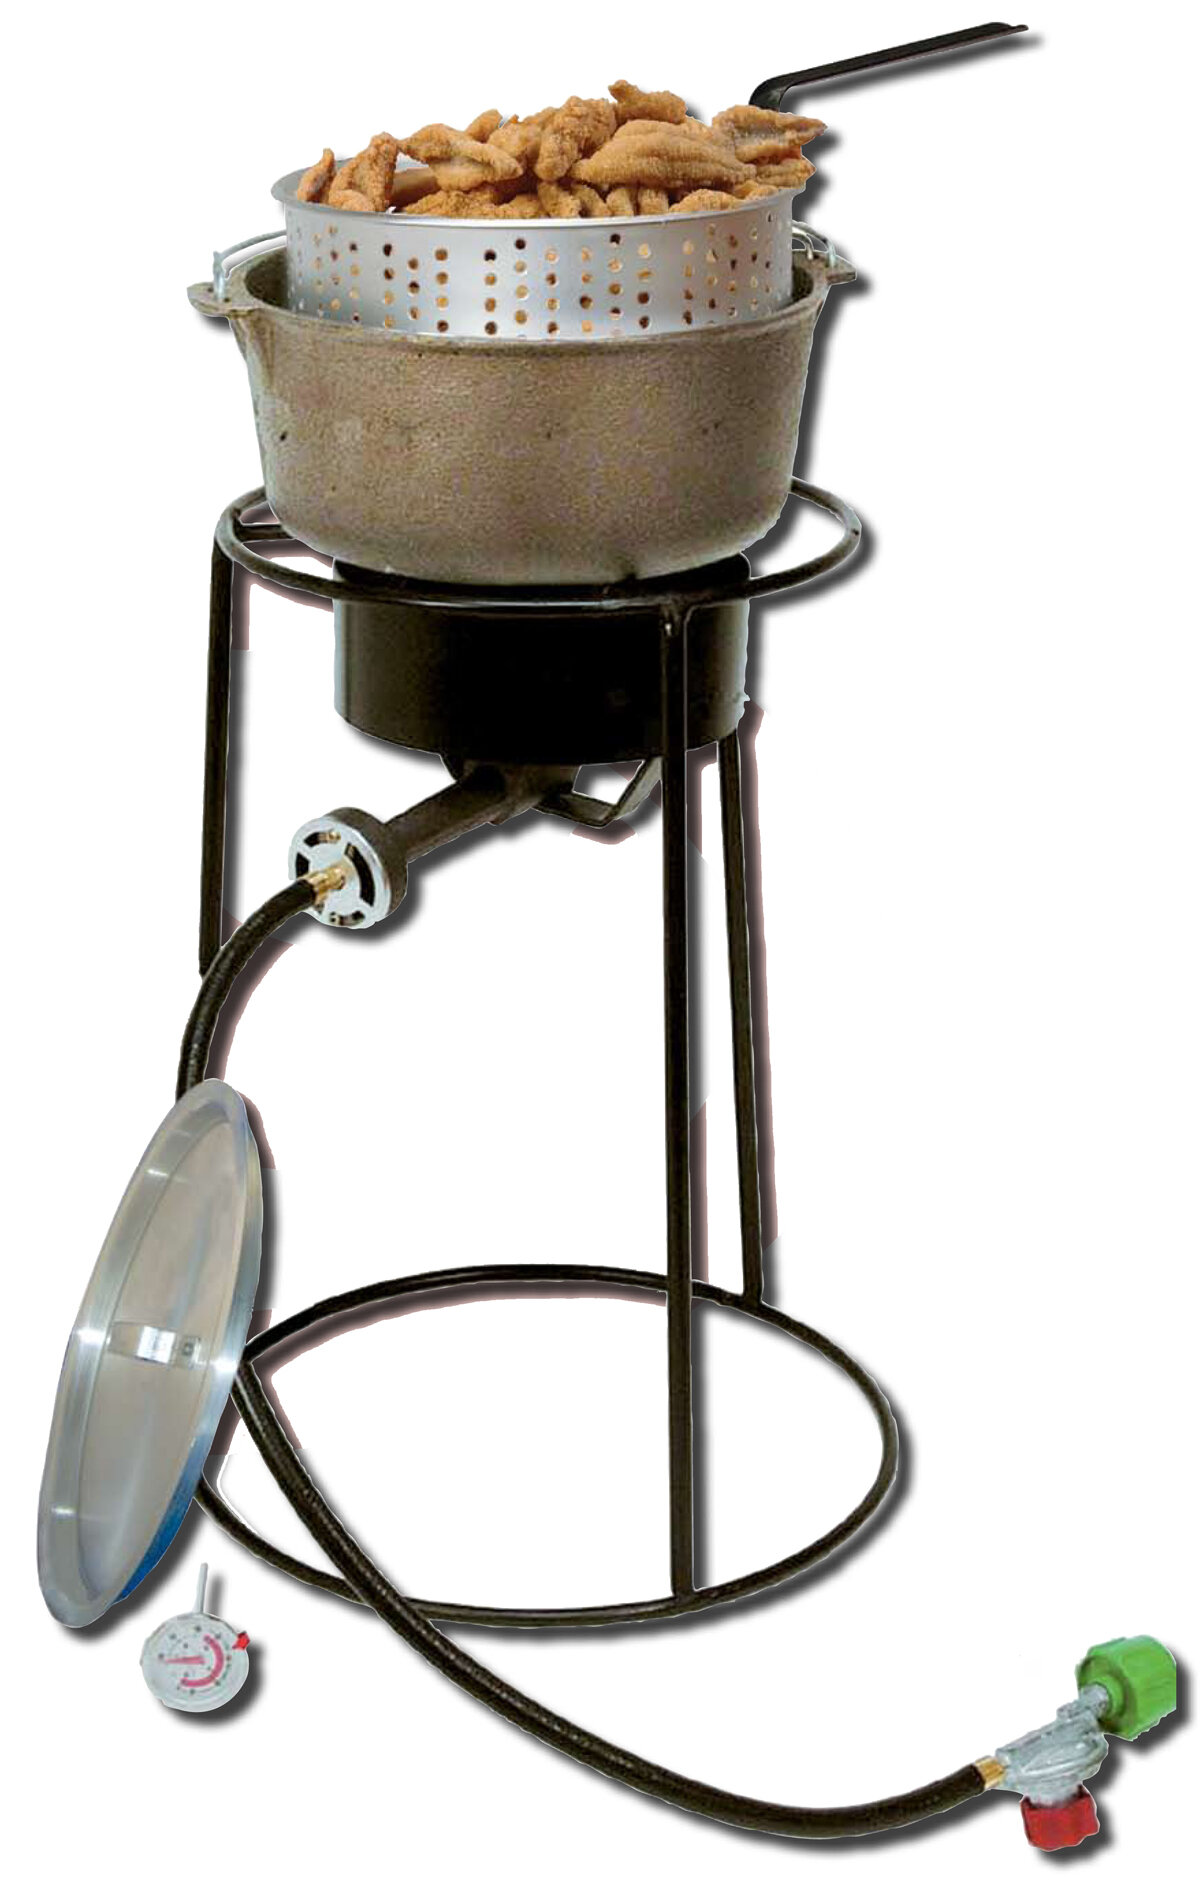 Cooking delicious meals outside is fast and easy with the King Kooker Outdo...